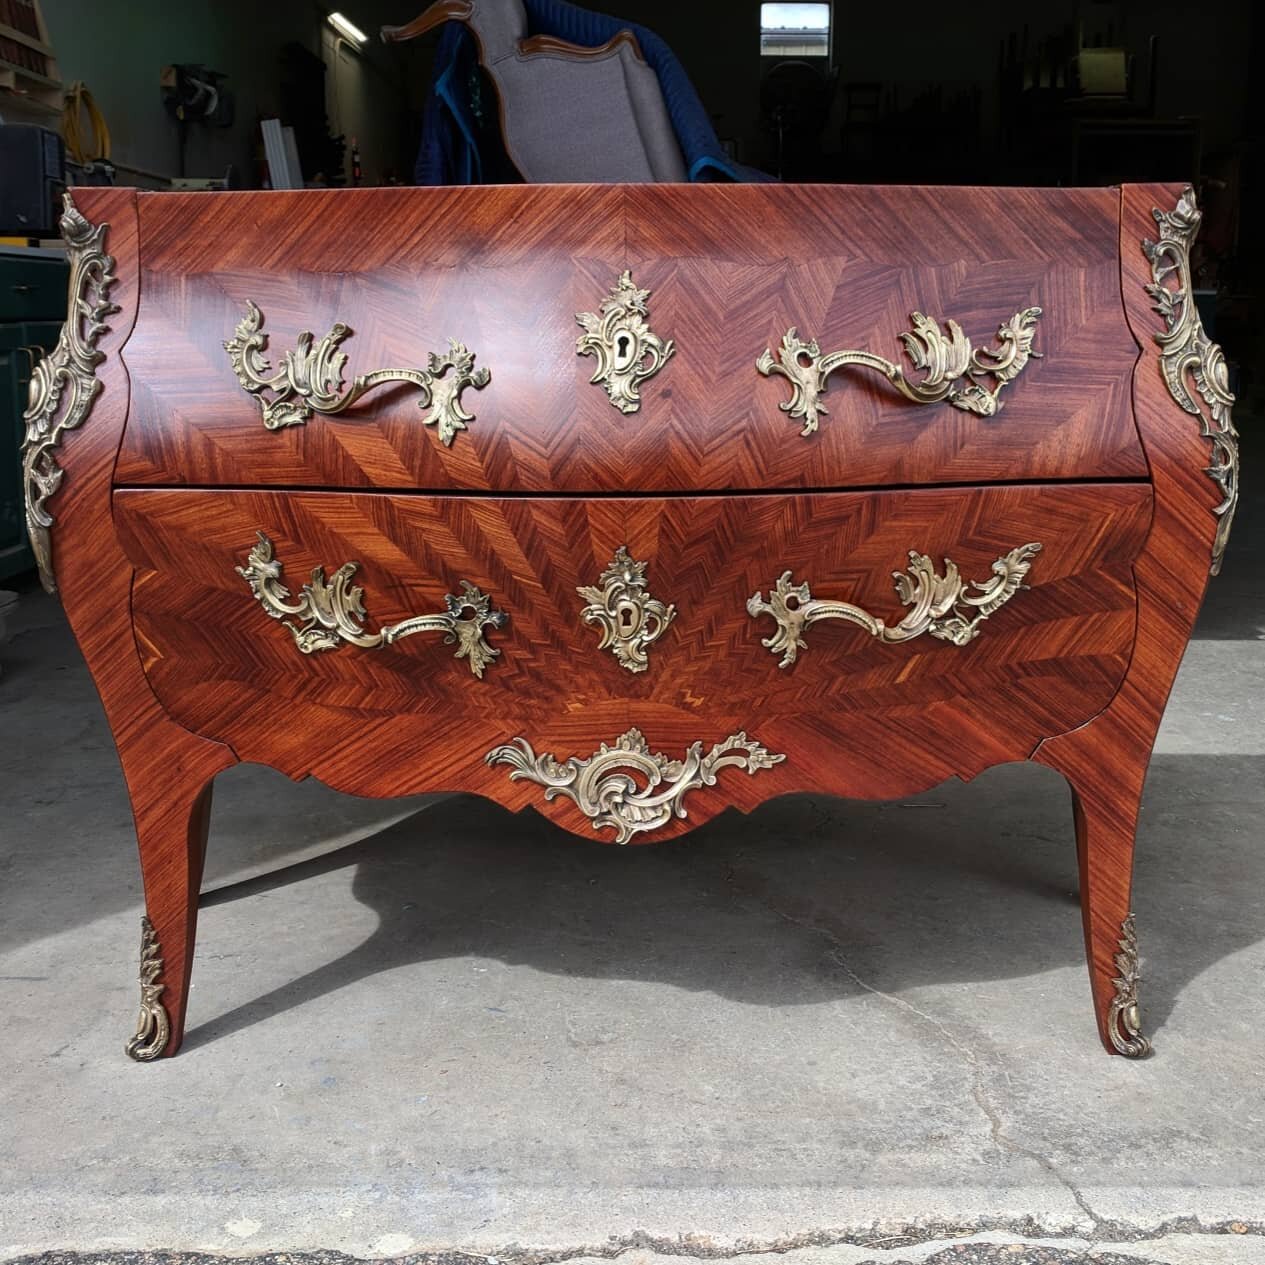 Transformation! (Scroll ---&gt;)

Check out this stunning antique bombe chest we had the pleasure of restoring.

As you can see, this item came to us in very poor shape. We took the time and care needed to repair the delicate veneer and assure this l